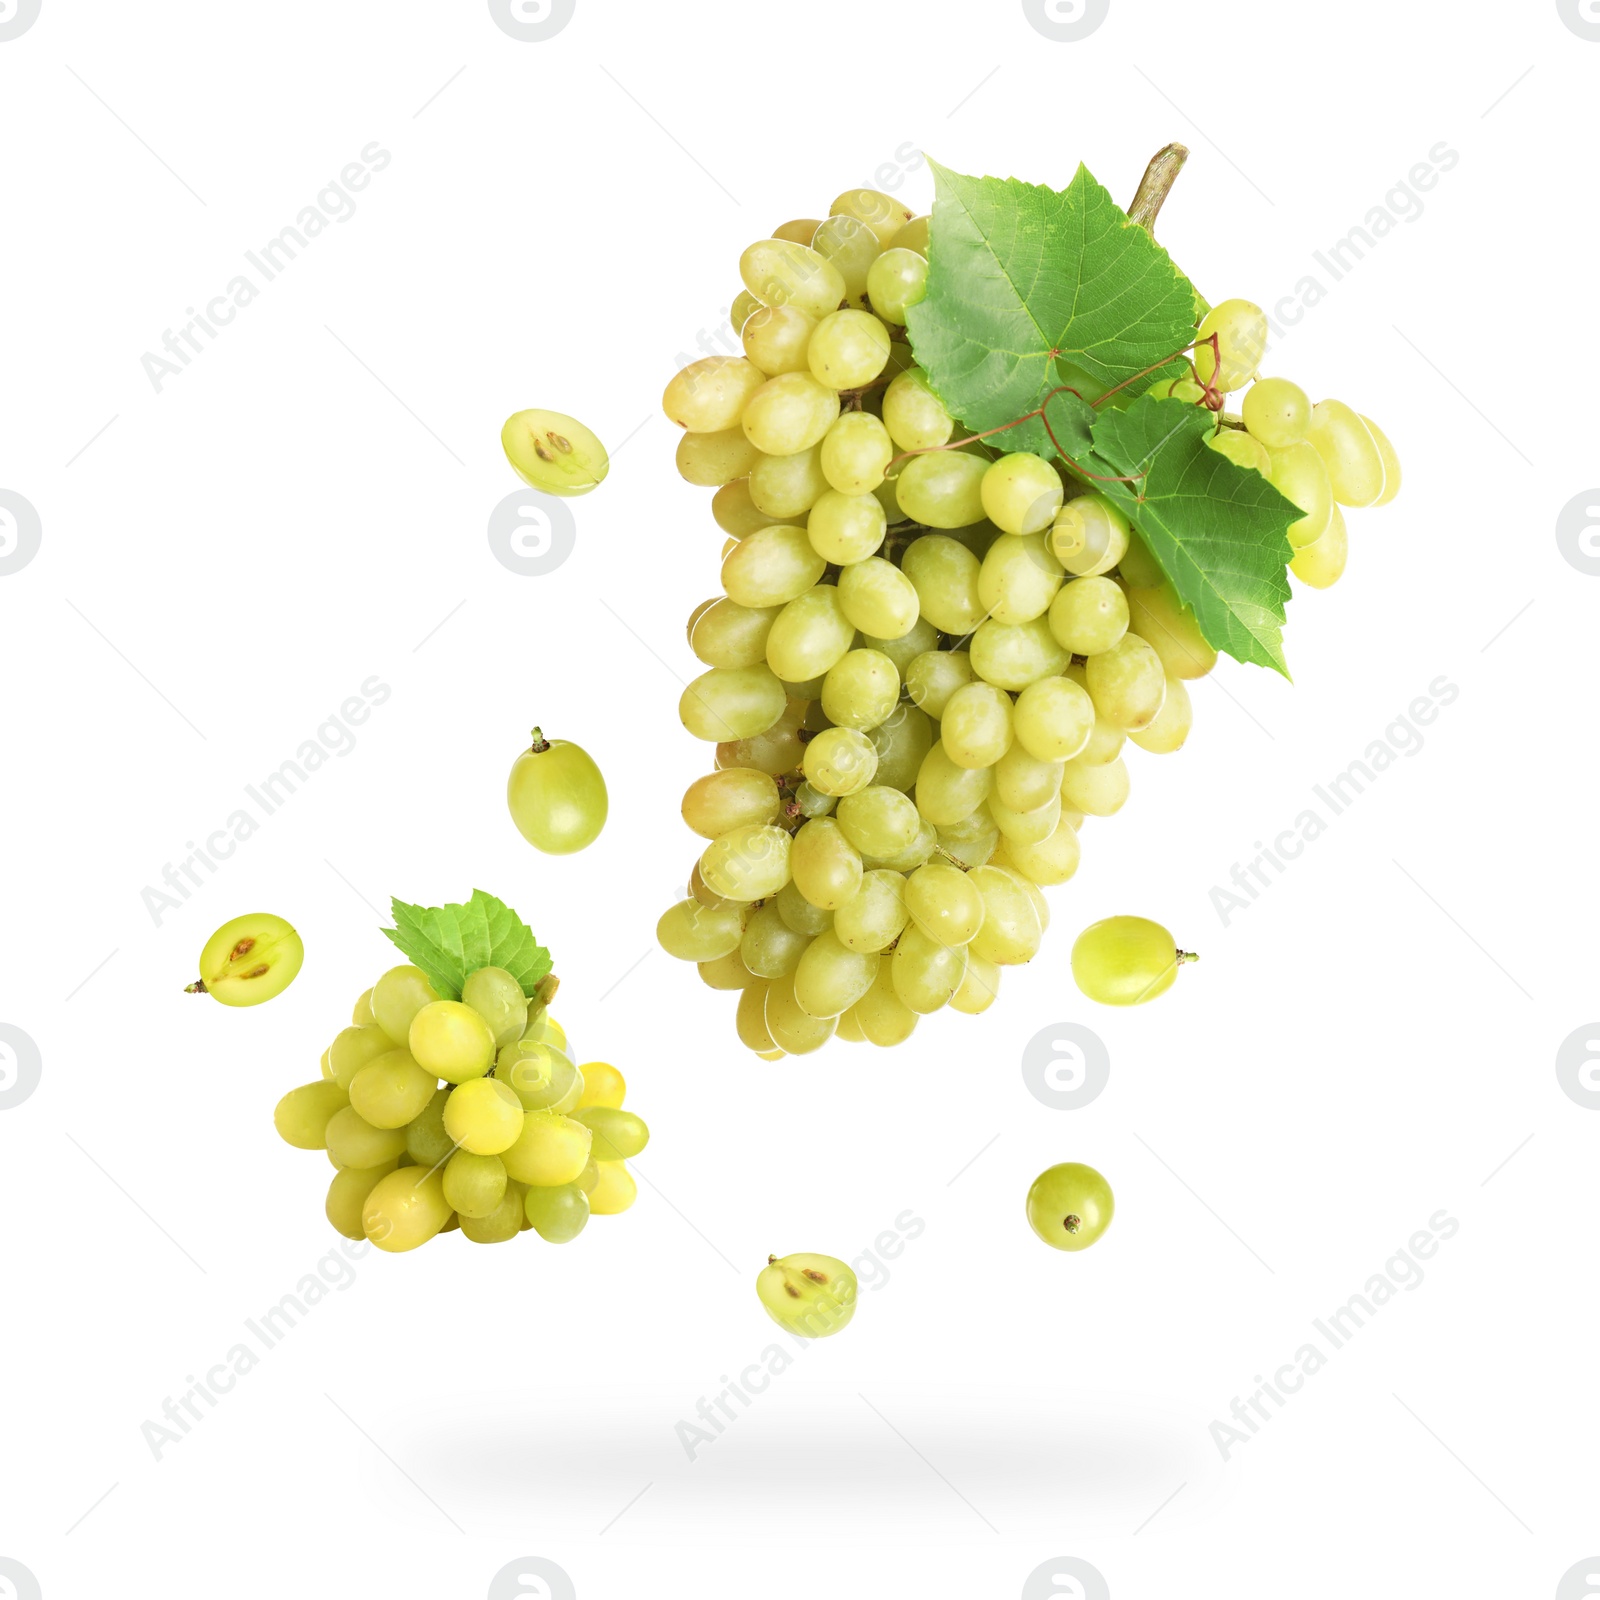 Image of Fresh grapes and leaves in air on white background